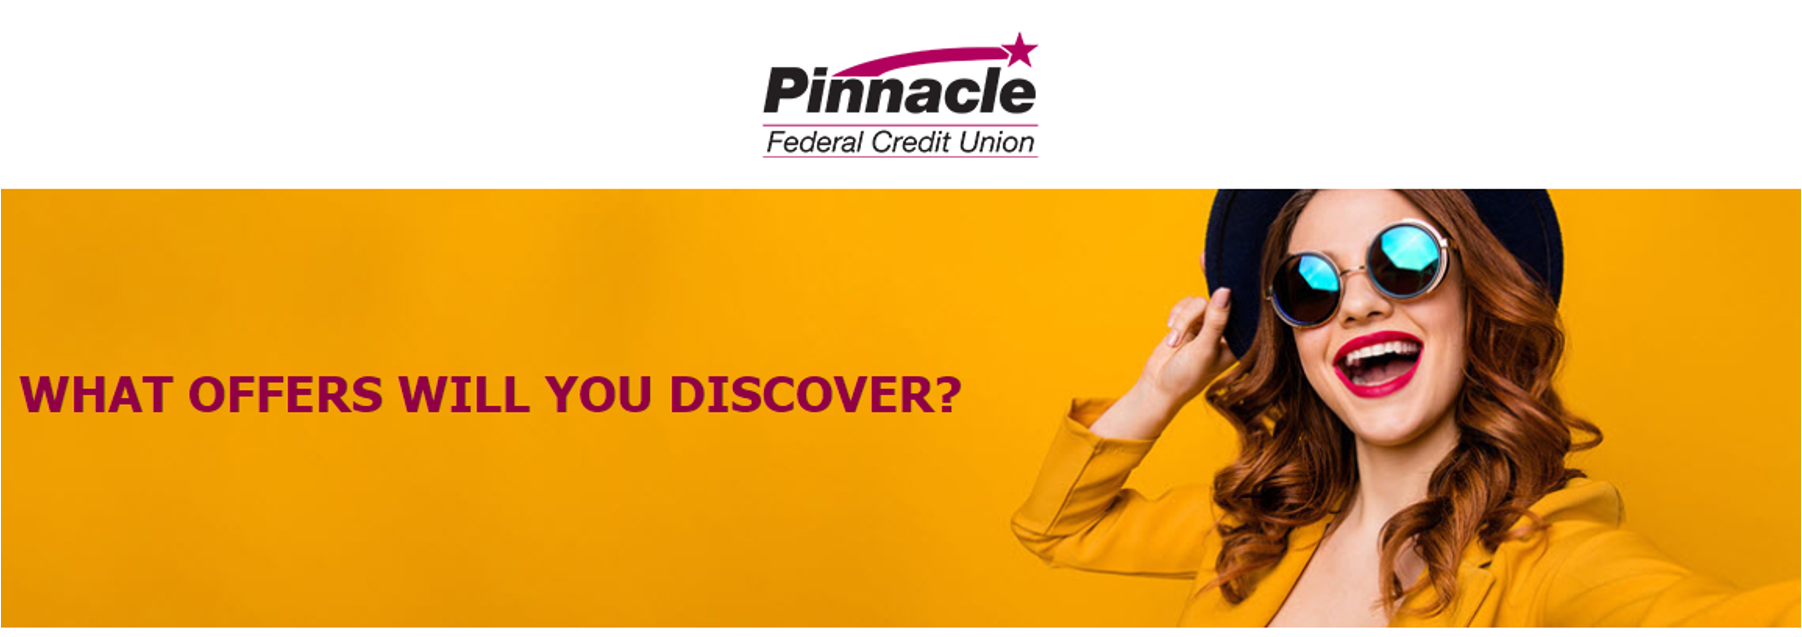 Pinnacle Federal Credit Union homepage – opens in a new window